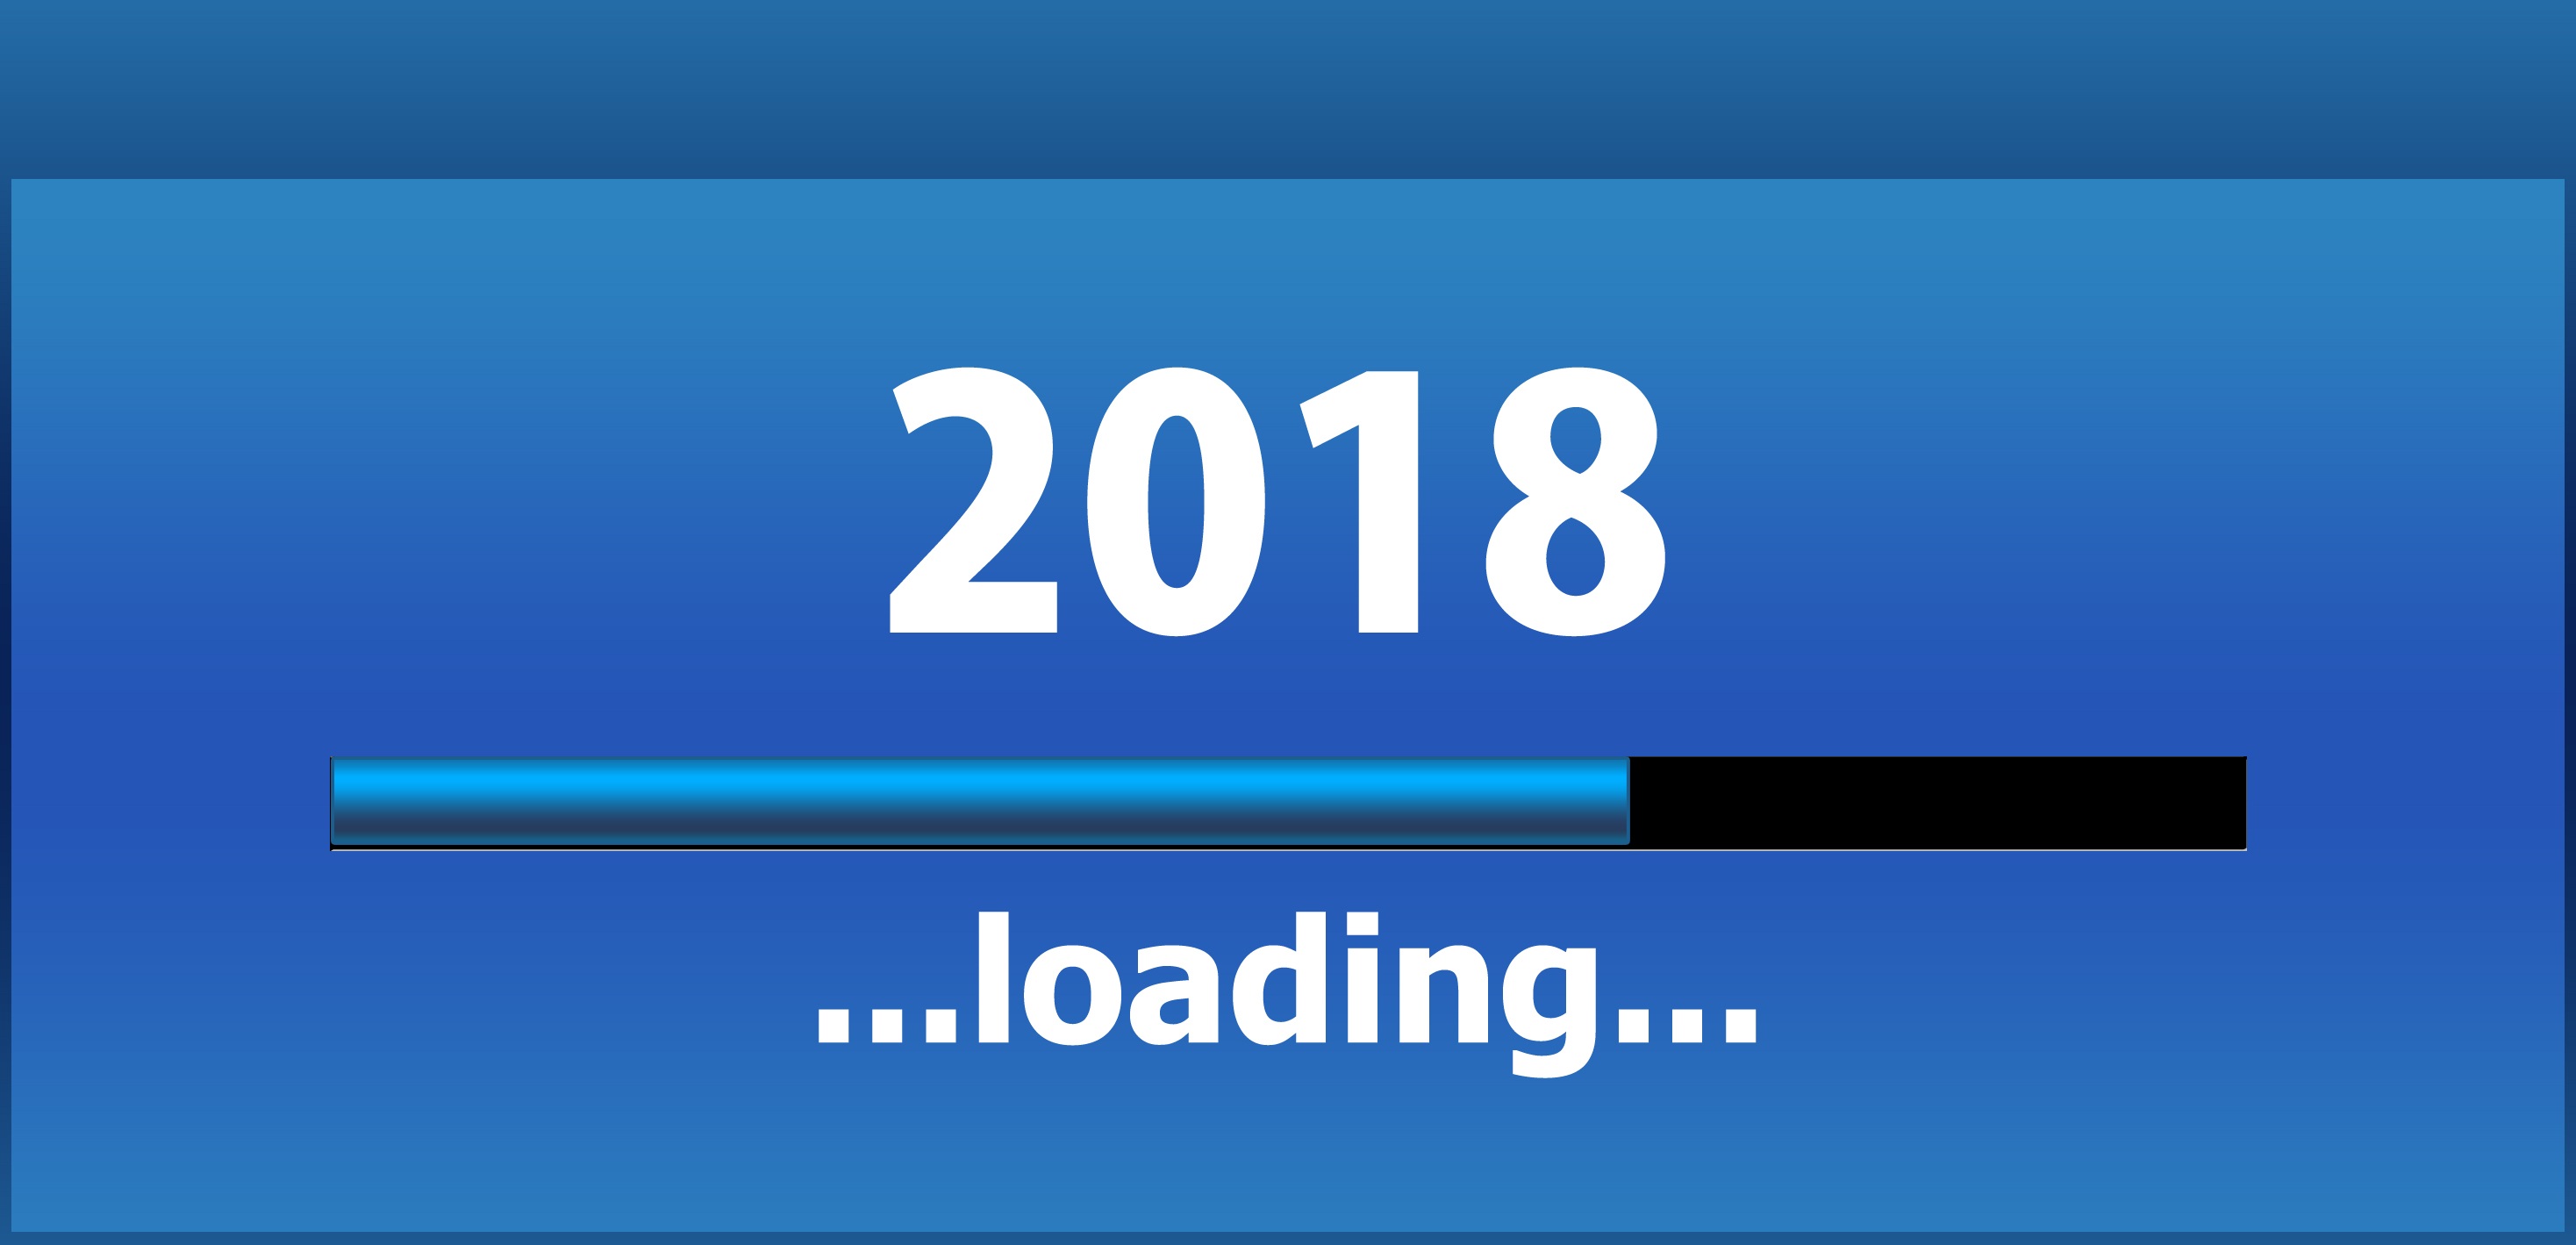 loading, holiday, new year 2018, blue, new year